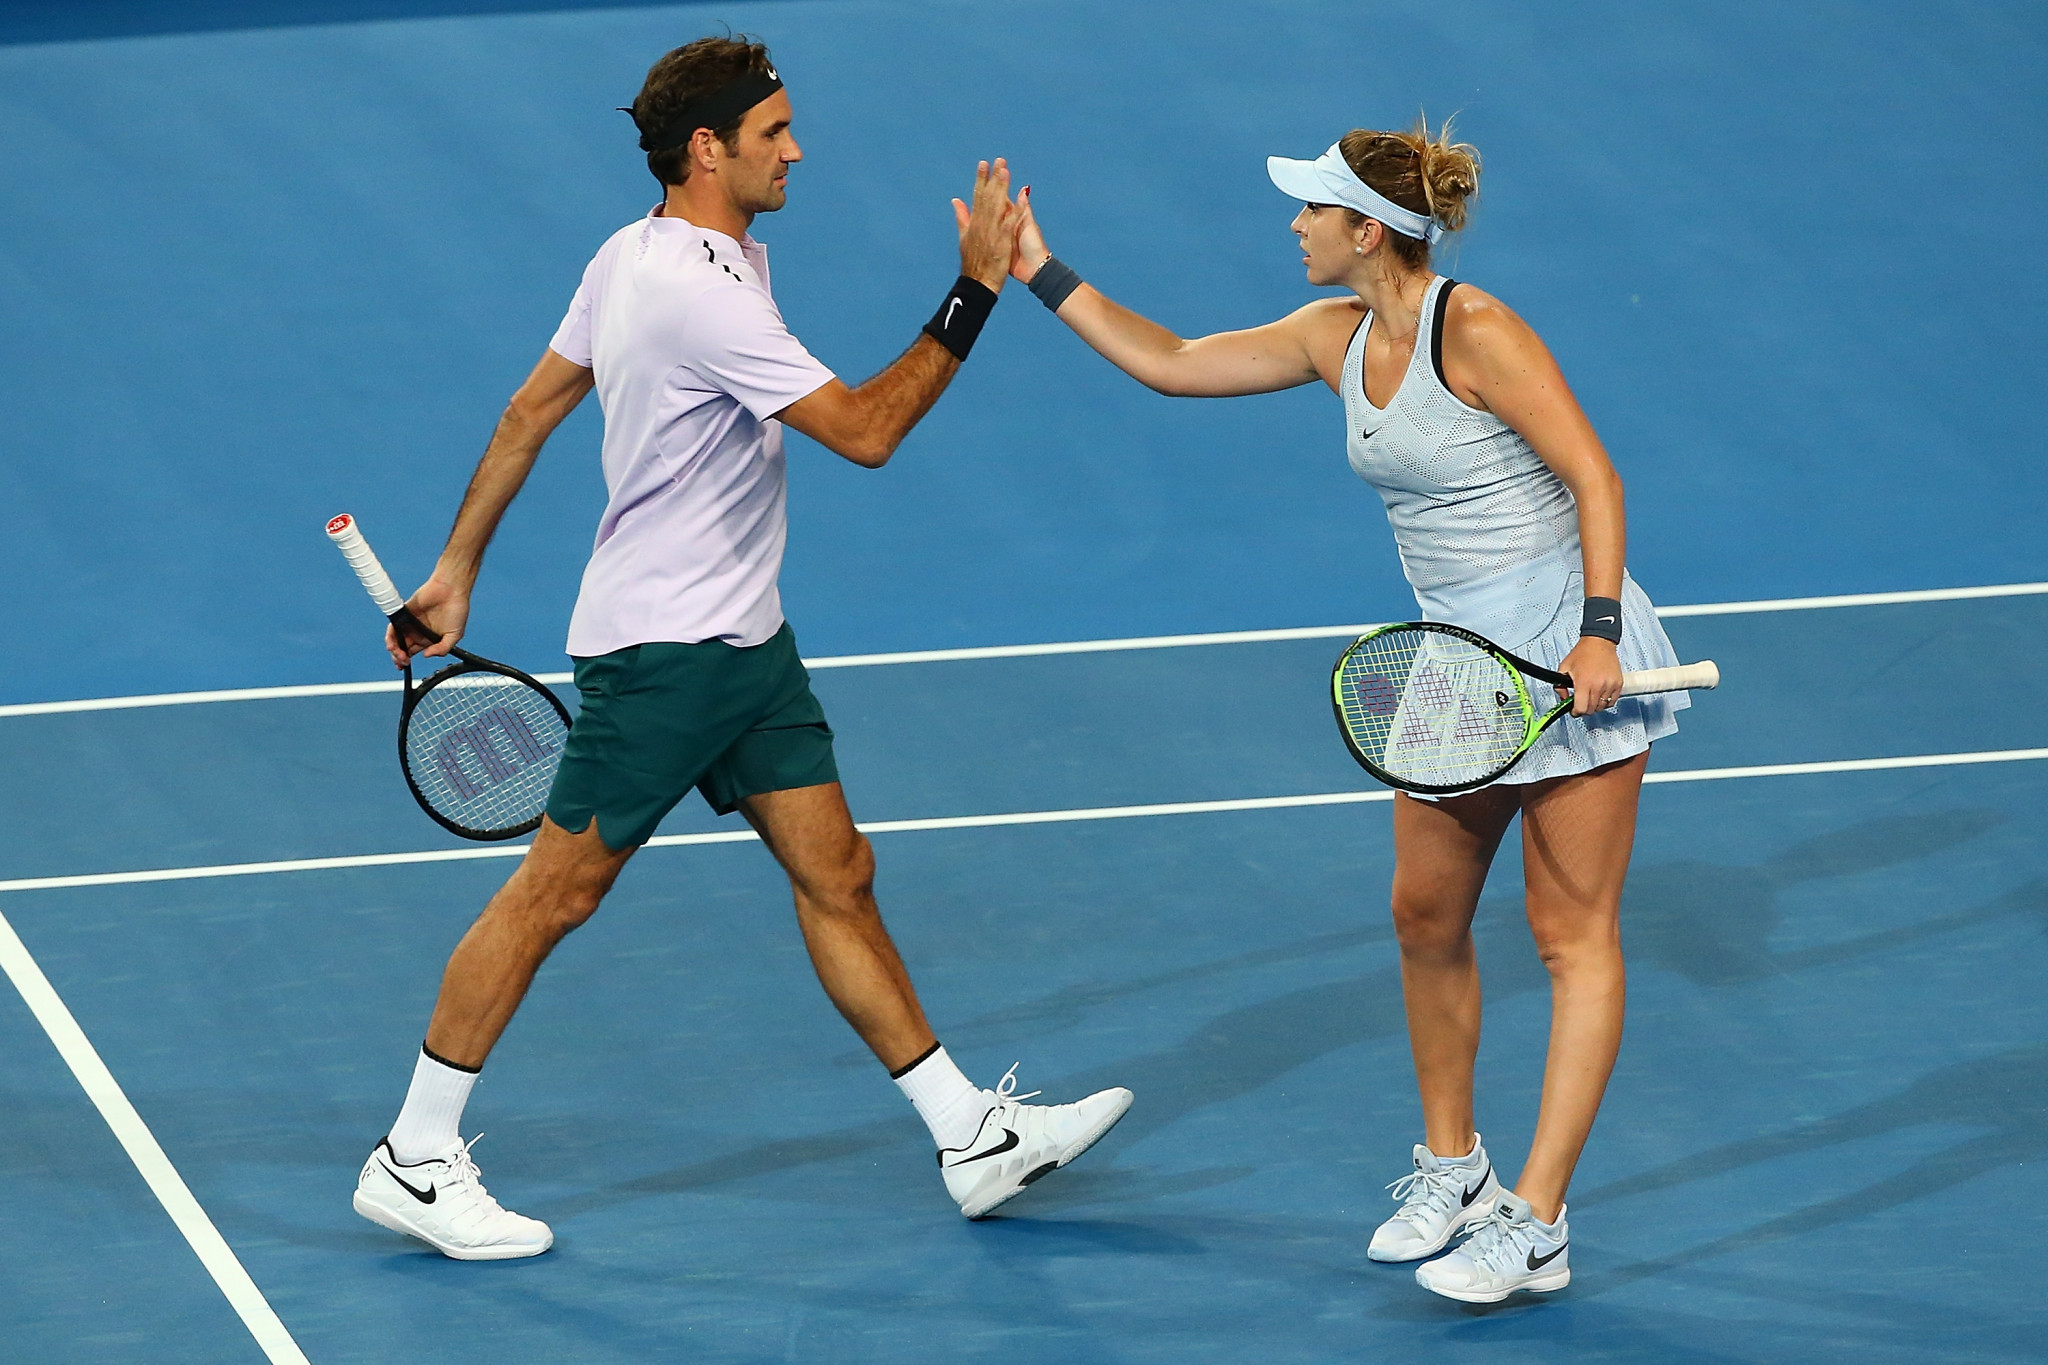 Switzerland enjoy perfect day at Hopman Cup to qualify for final